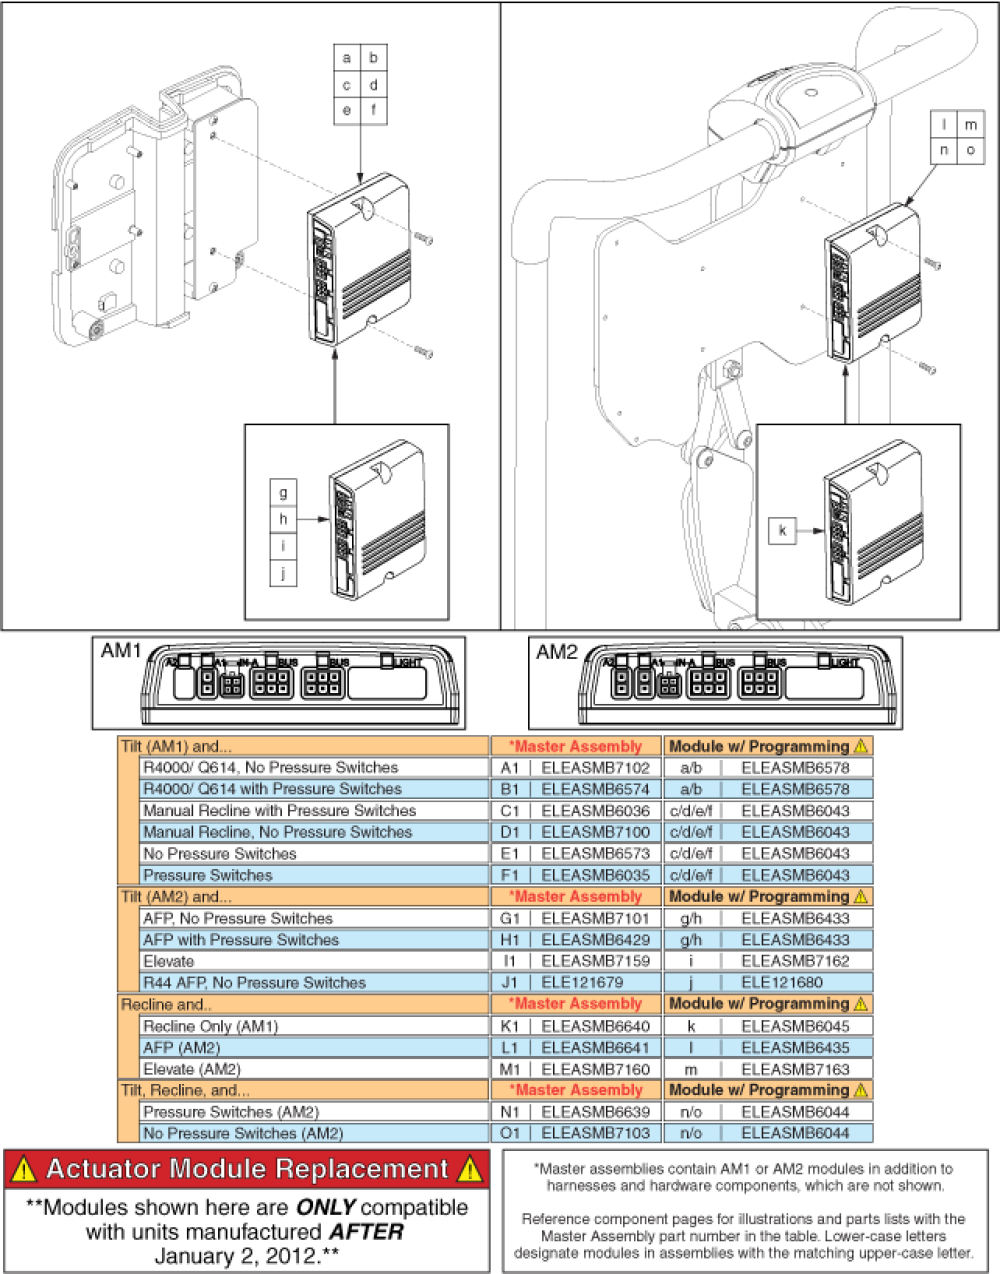 Table - Am1/ Am2, Master Level, After 1/2/12 parts diagram